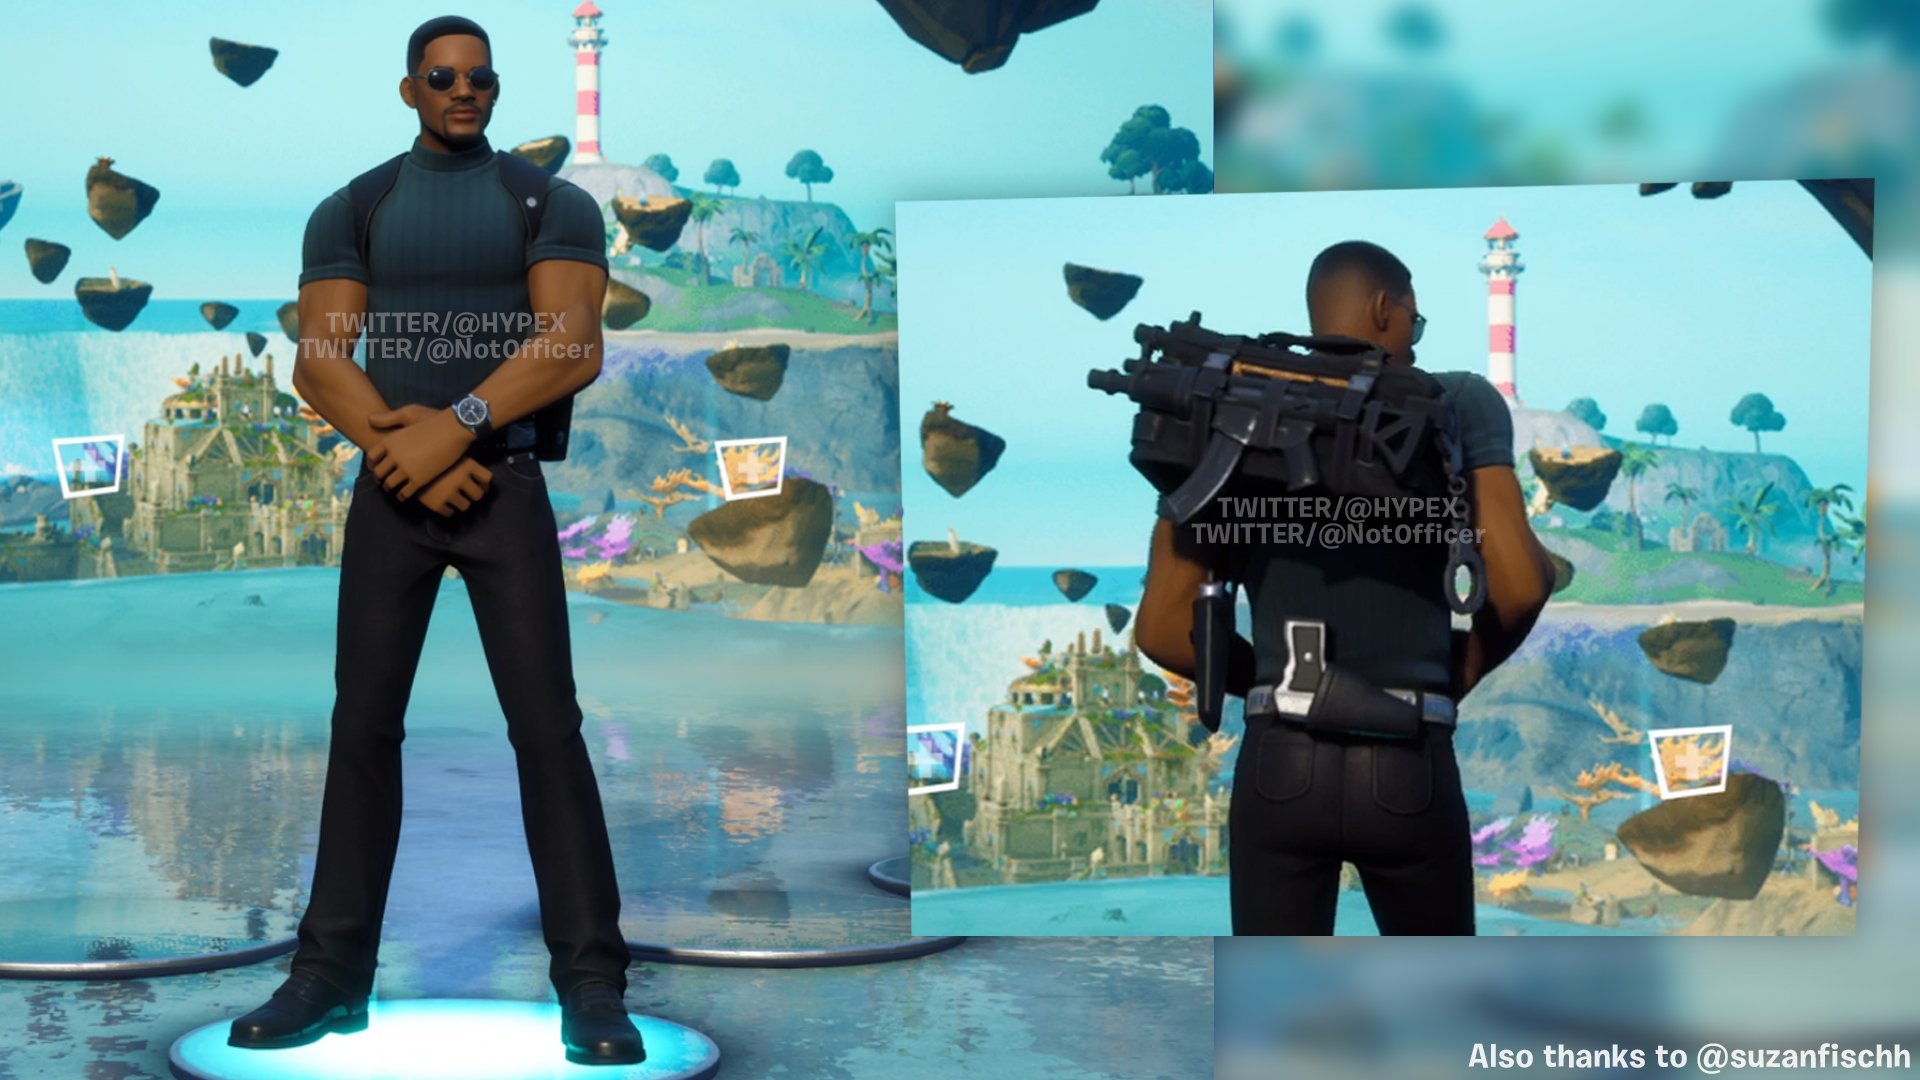 HYPEX Mike Lowrey (Will Smith) Will Be Out Tomorrow Or 29th (most Likely Tomorrow)! Here's His Item Shop Announcement Text: The Tough Talking Detective Who's Ready For Anything. When The